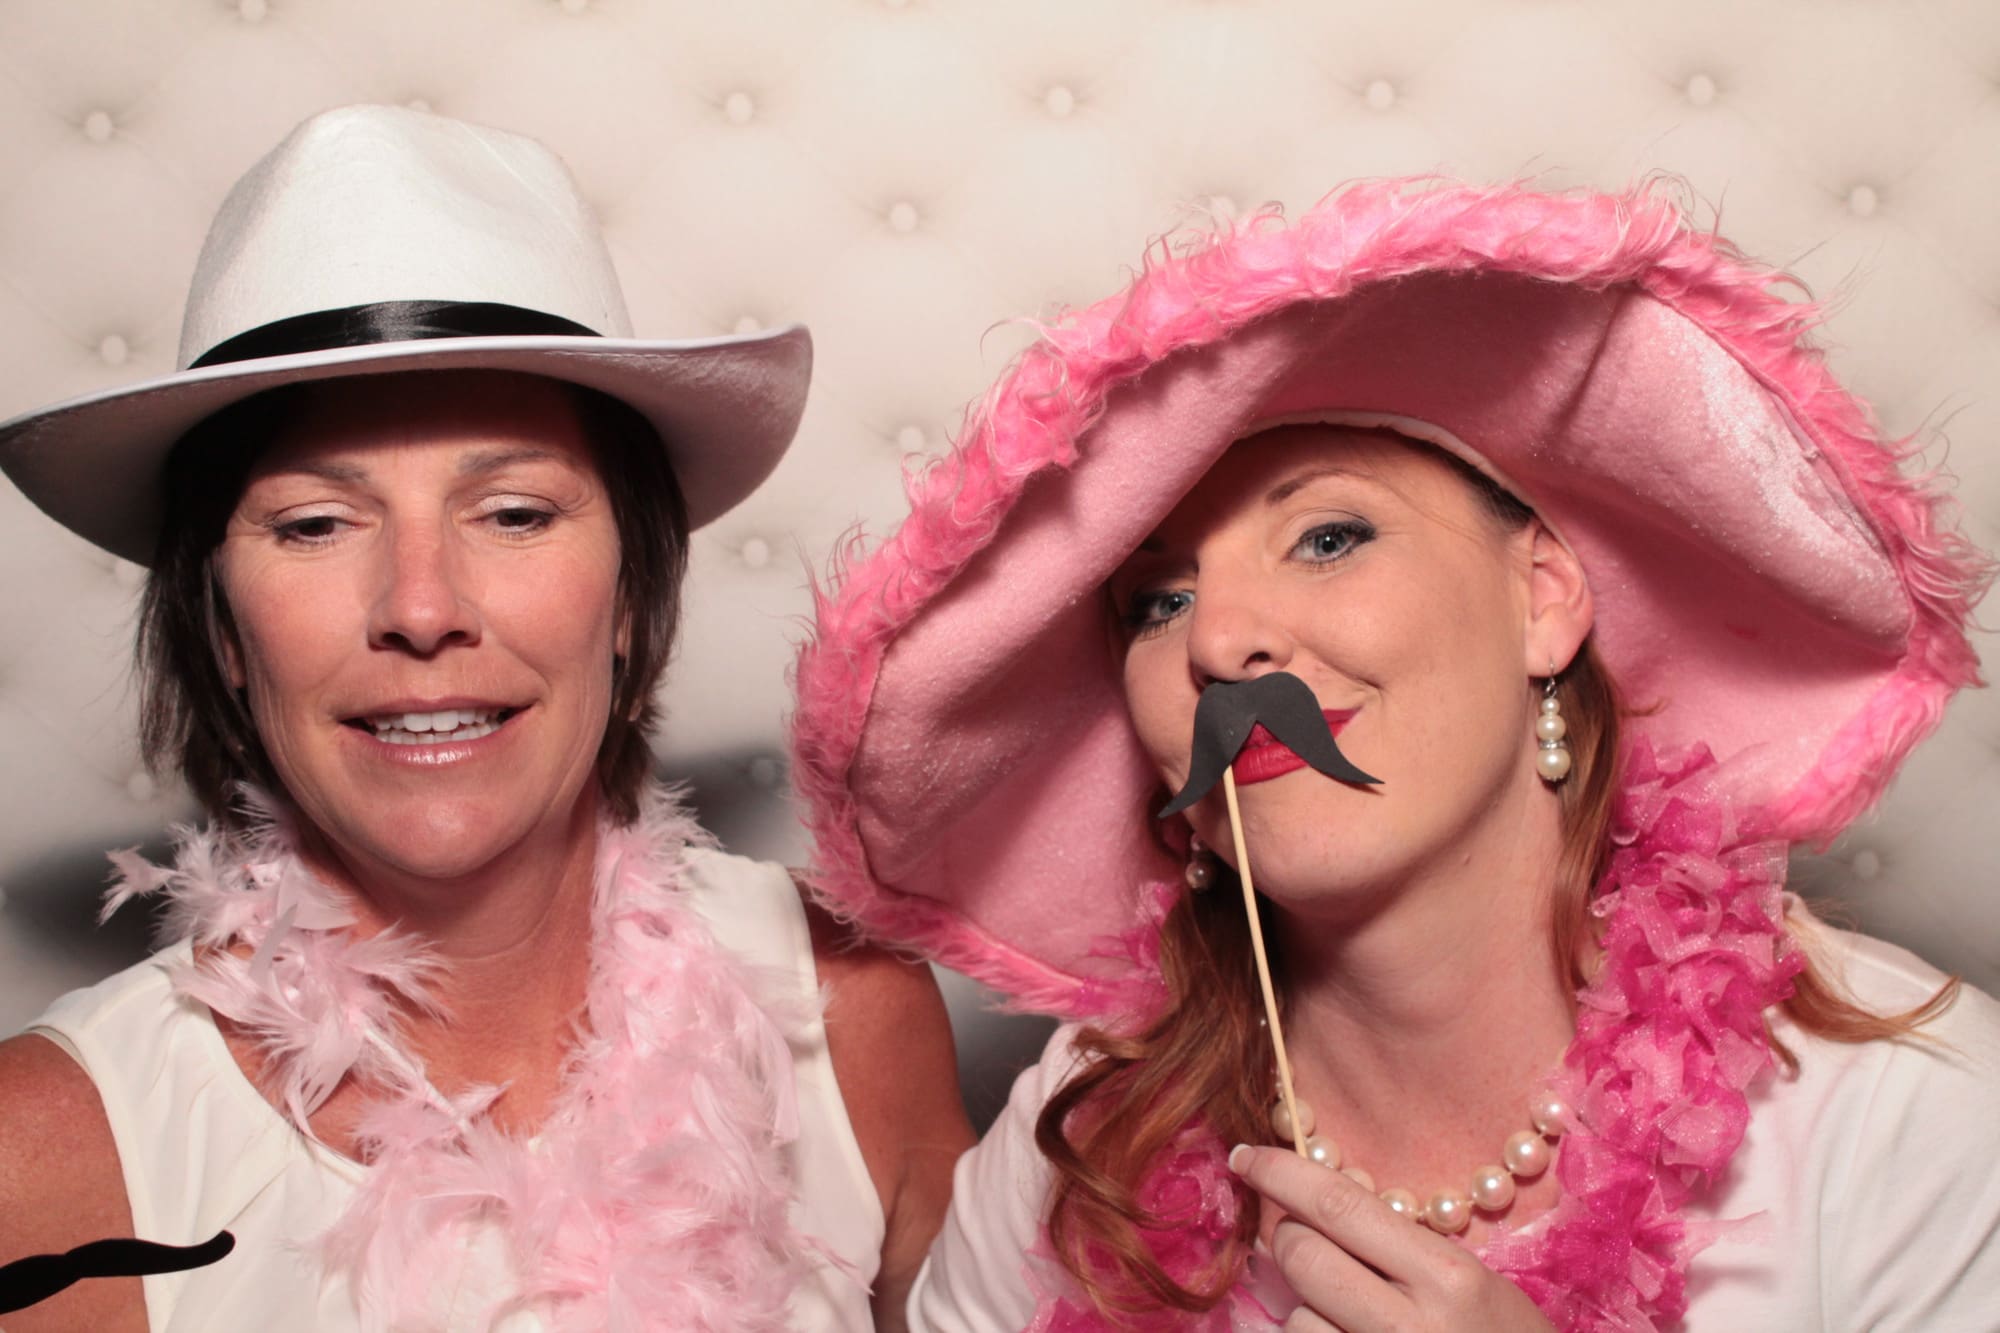 Photo Booth-Rental-Corporate-Conference-Hilton-No. 1-Props-Memories-Fun-Best